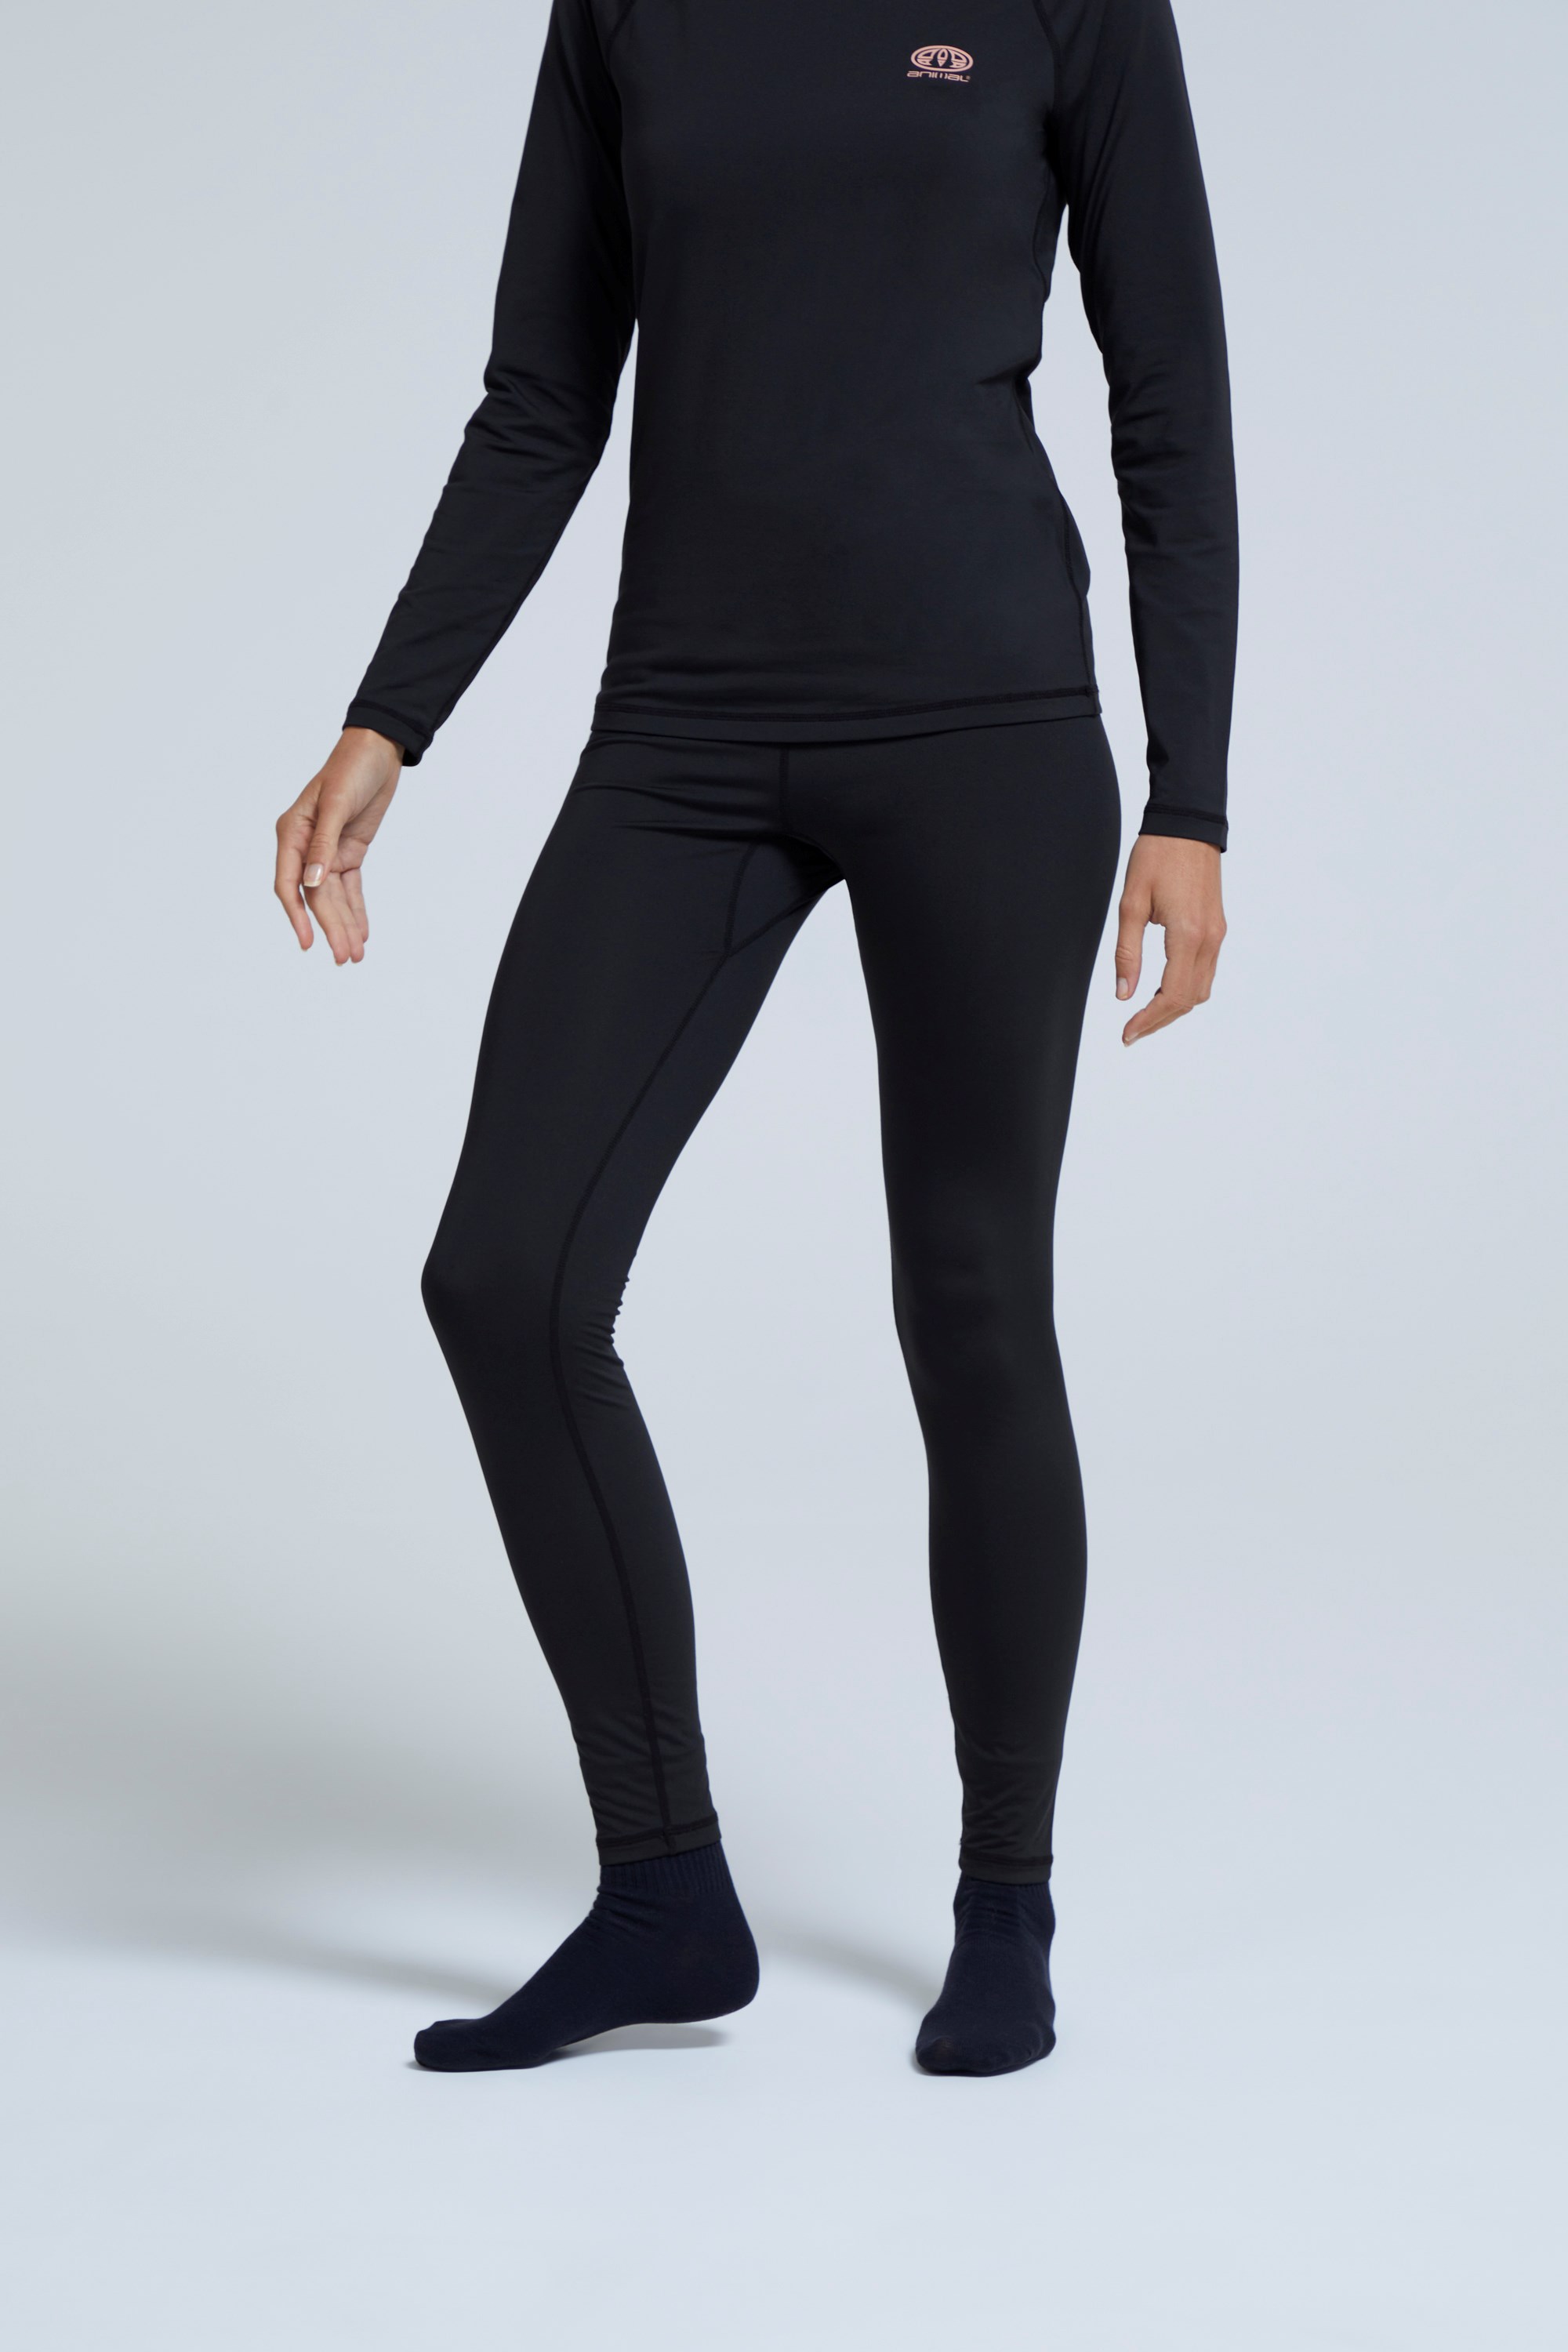 Thick And Warm Womens Fleece Thermal Fleece Lined Leggings Primark For  Winter From Freshadang, $27.2